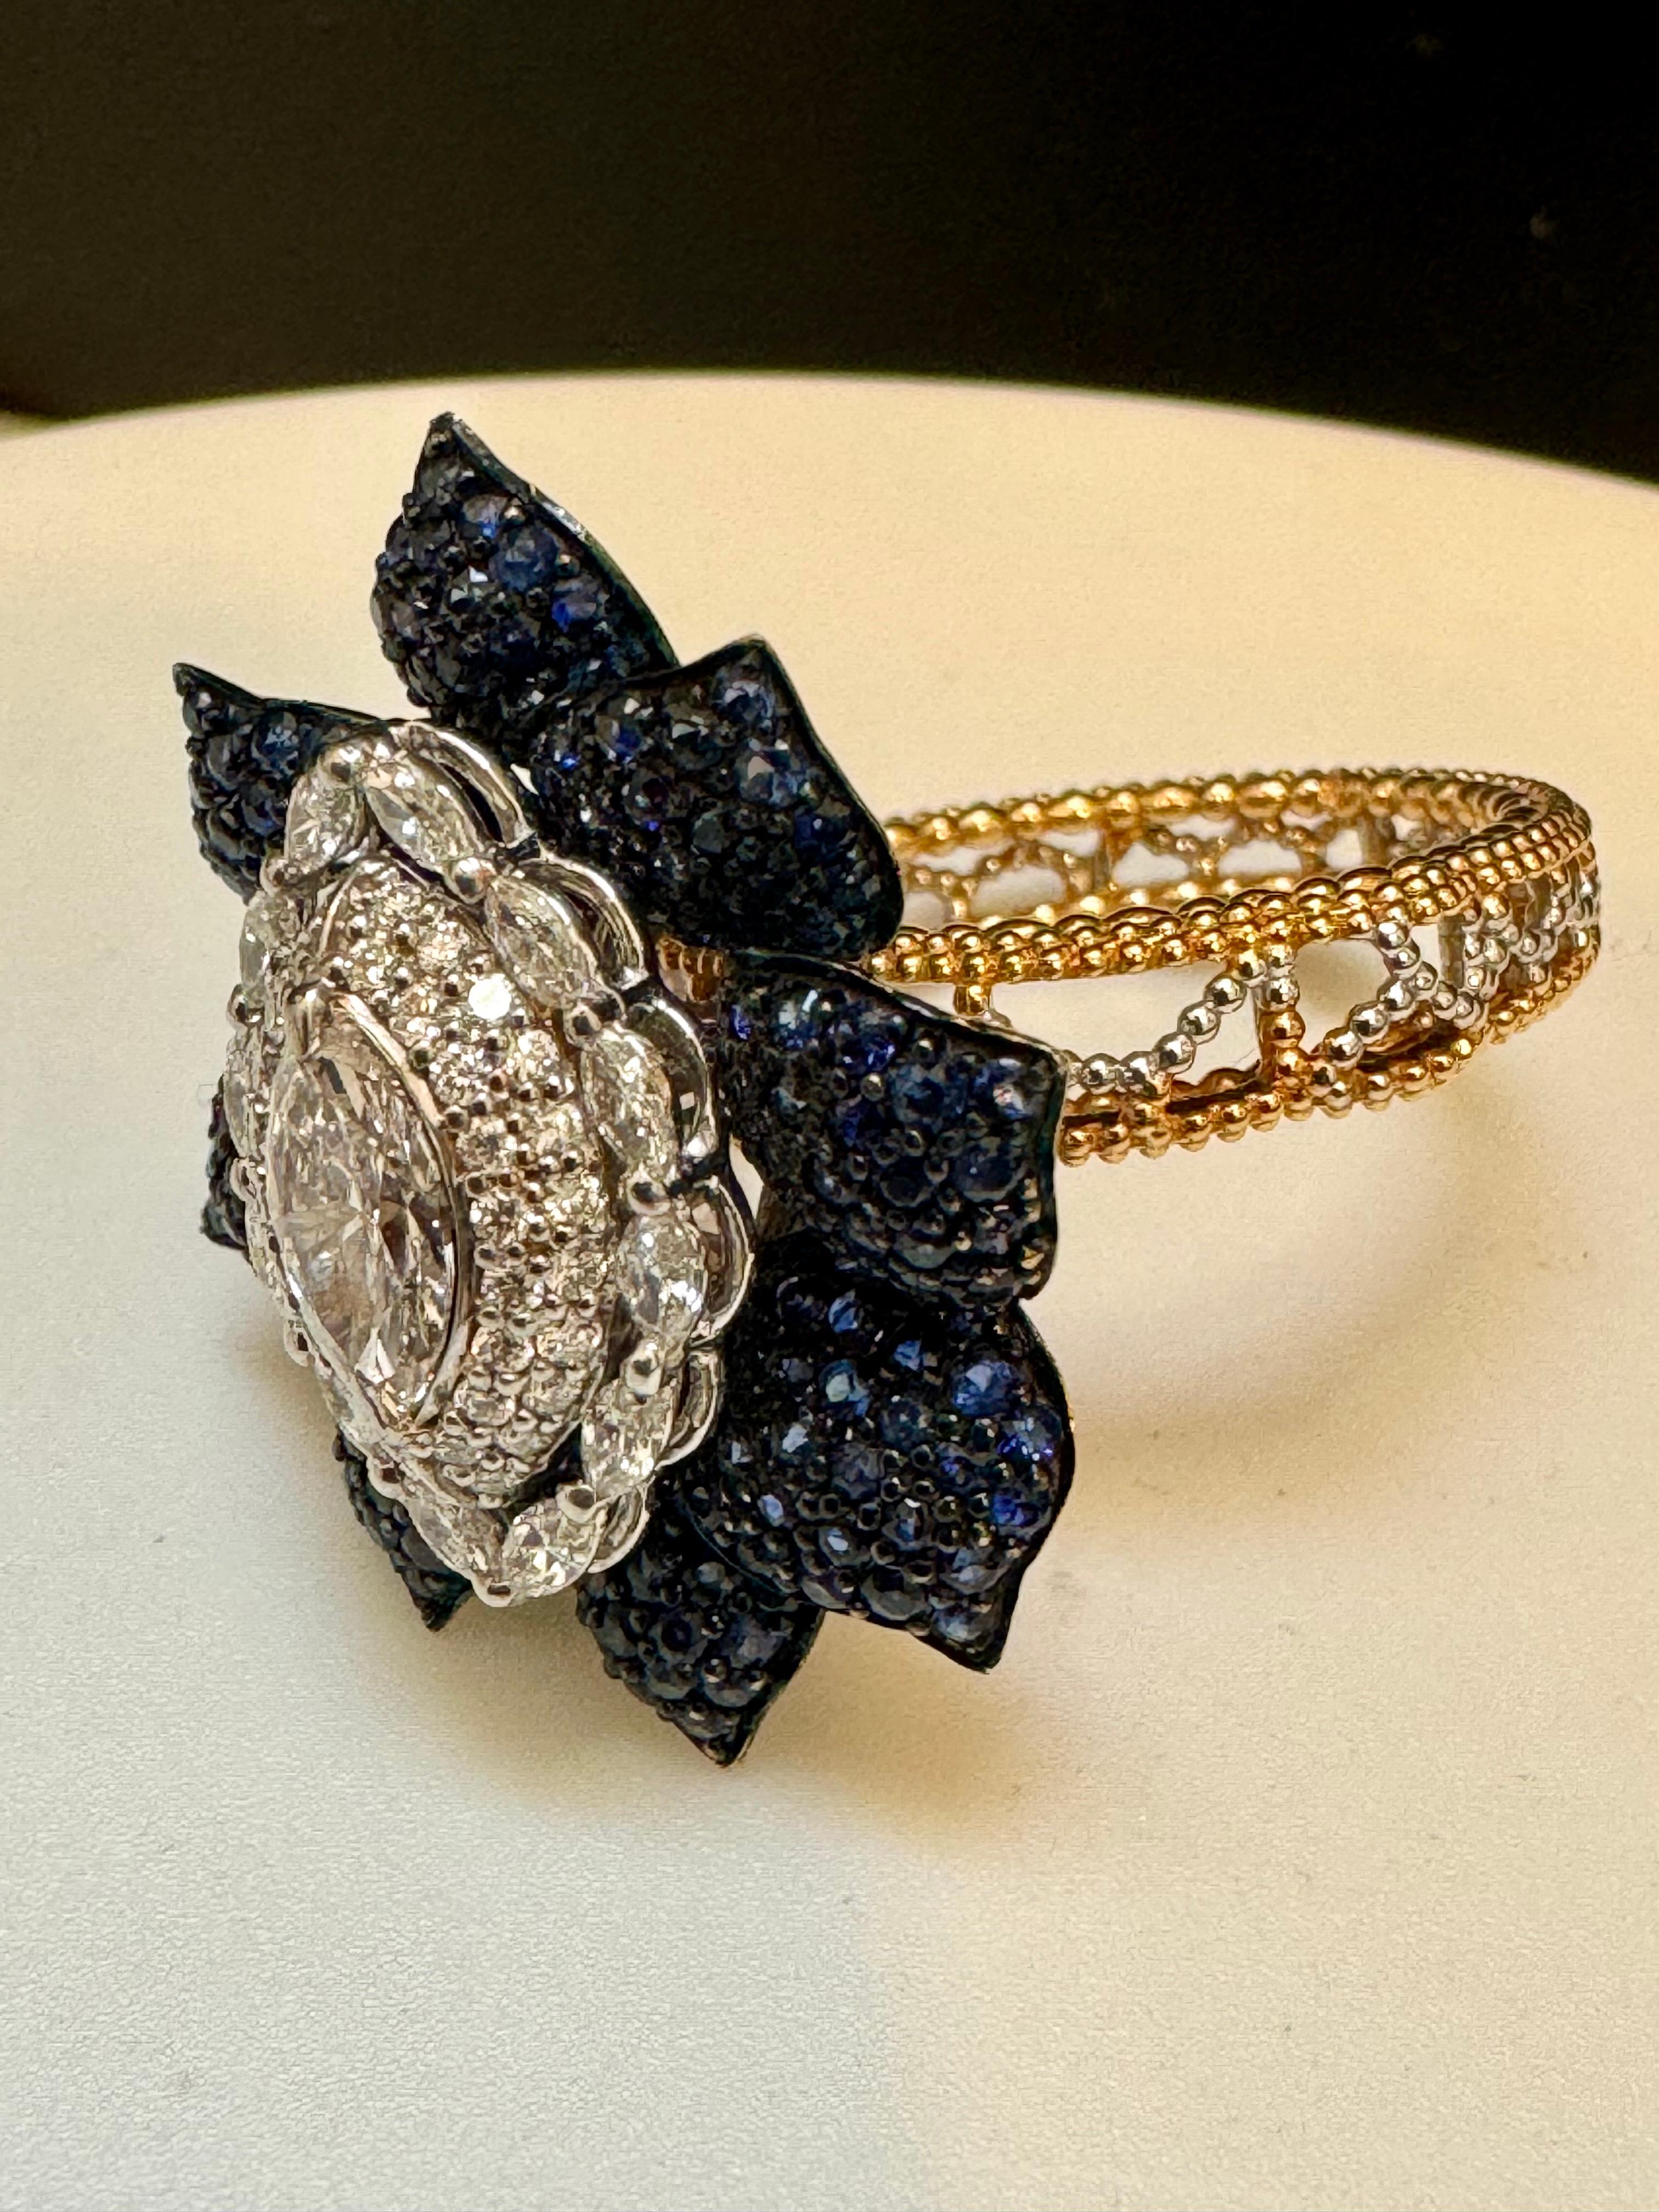 3 Ct Blue Sapphire & 1.5 Ct Diamond Flower Ring in 18 Kt Two Tone  Gold  Size7 For Sale 3